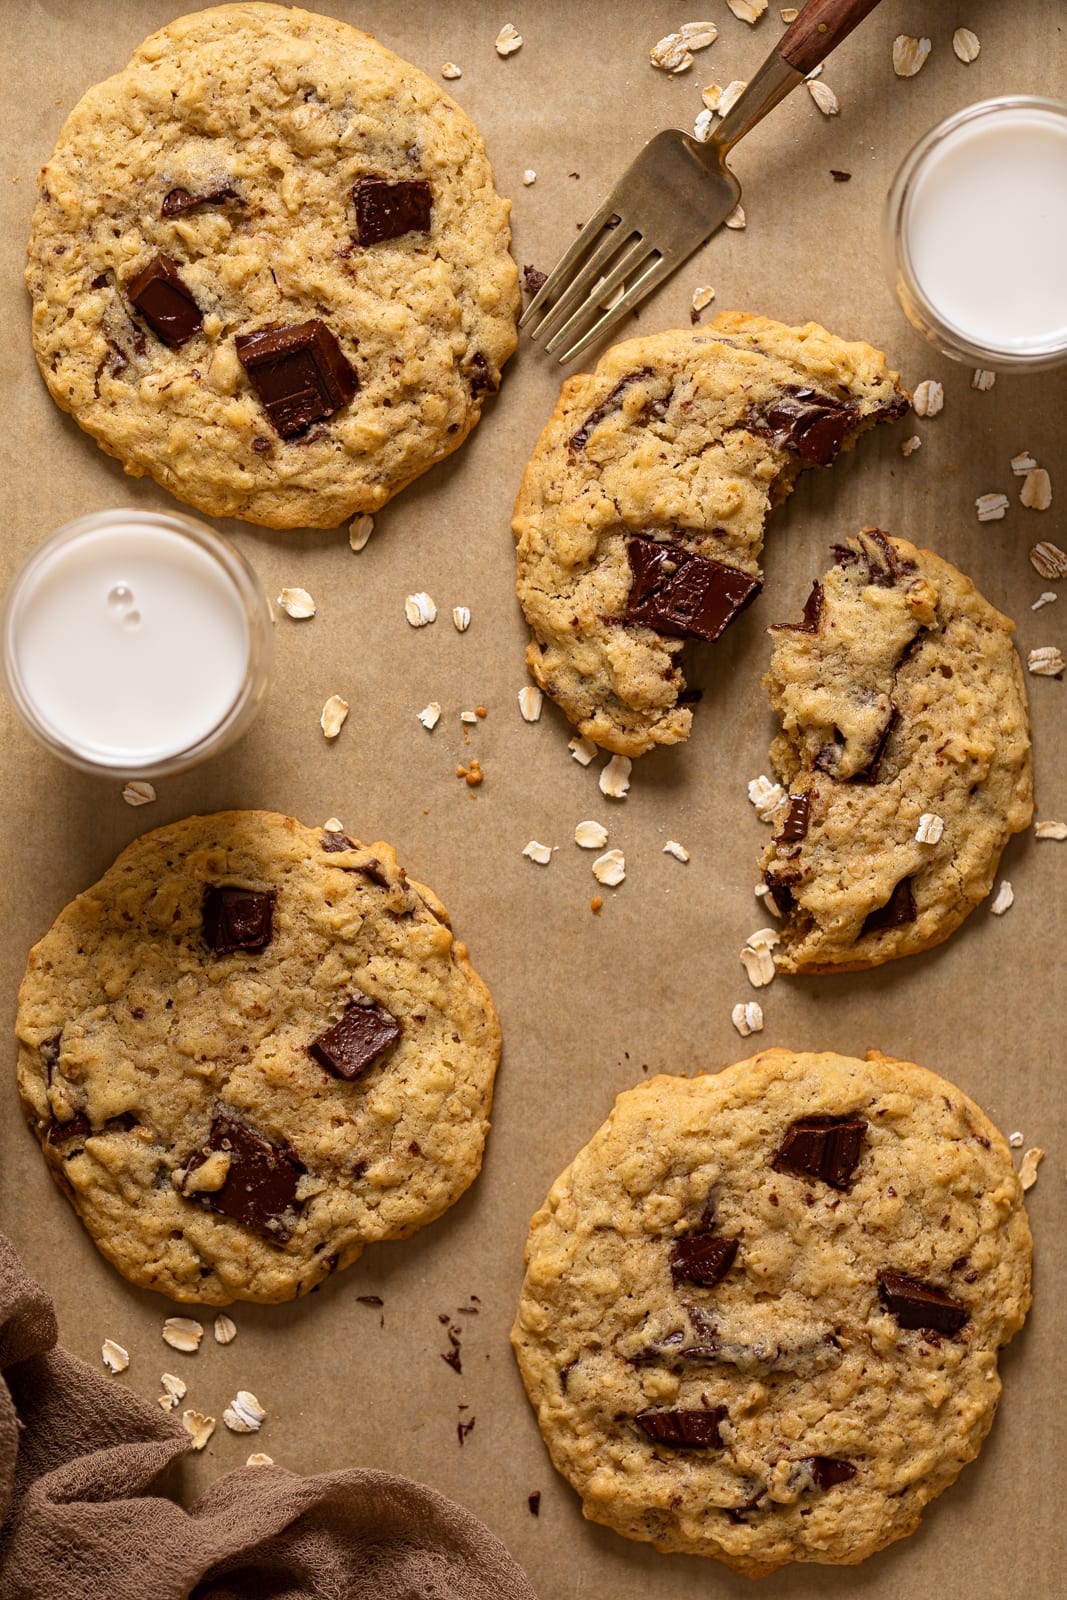 Big Bakery-Style Oatmeal Chocolate Chip Cookies